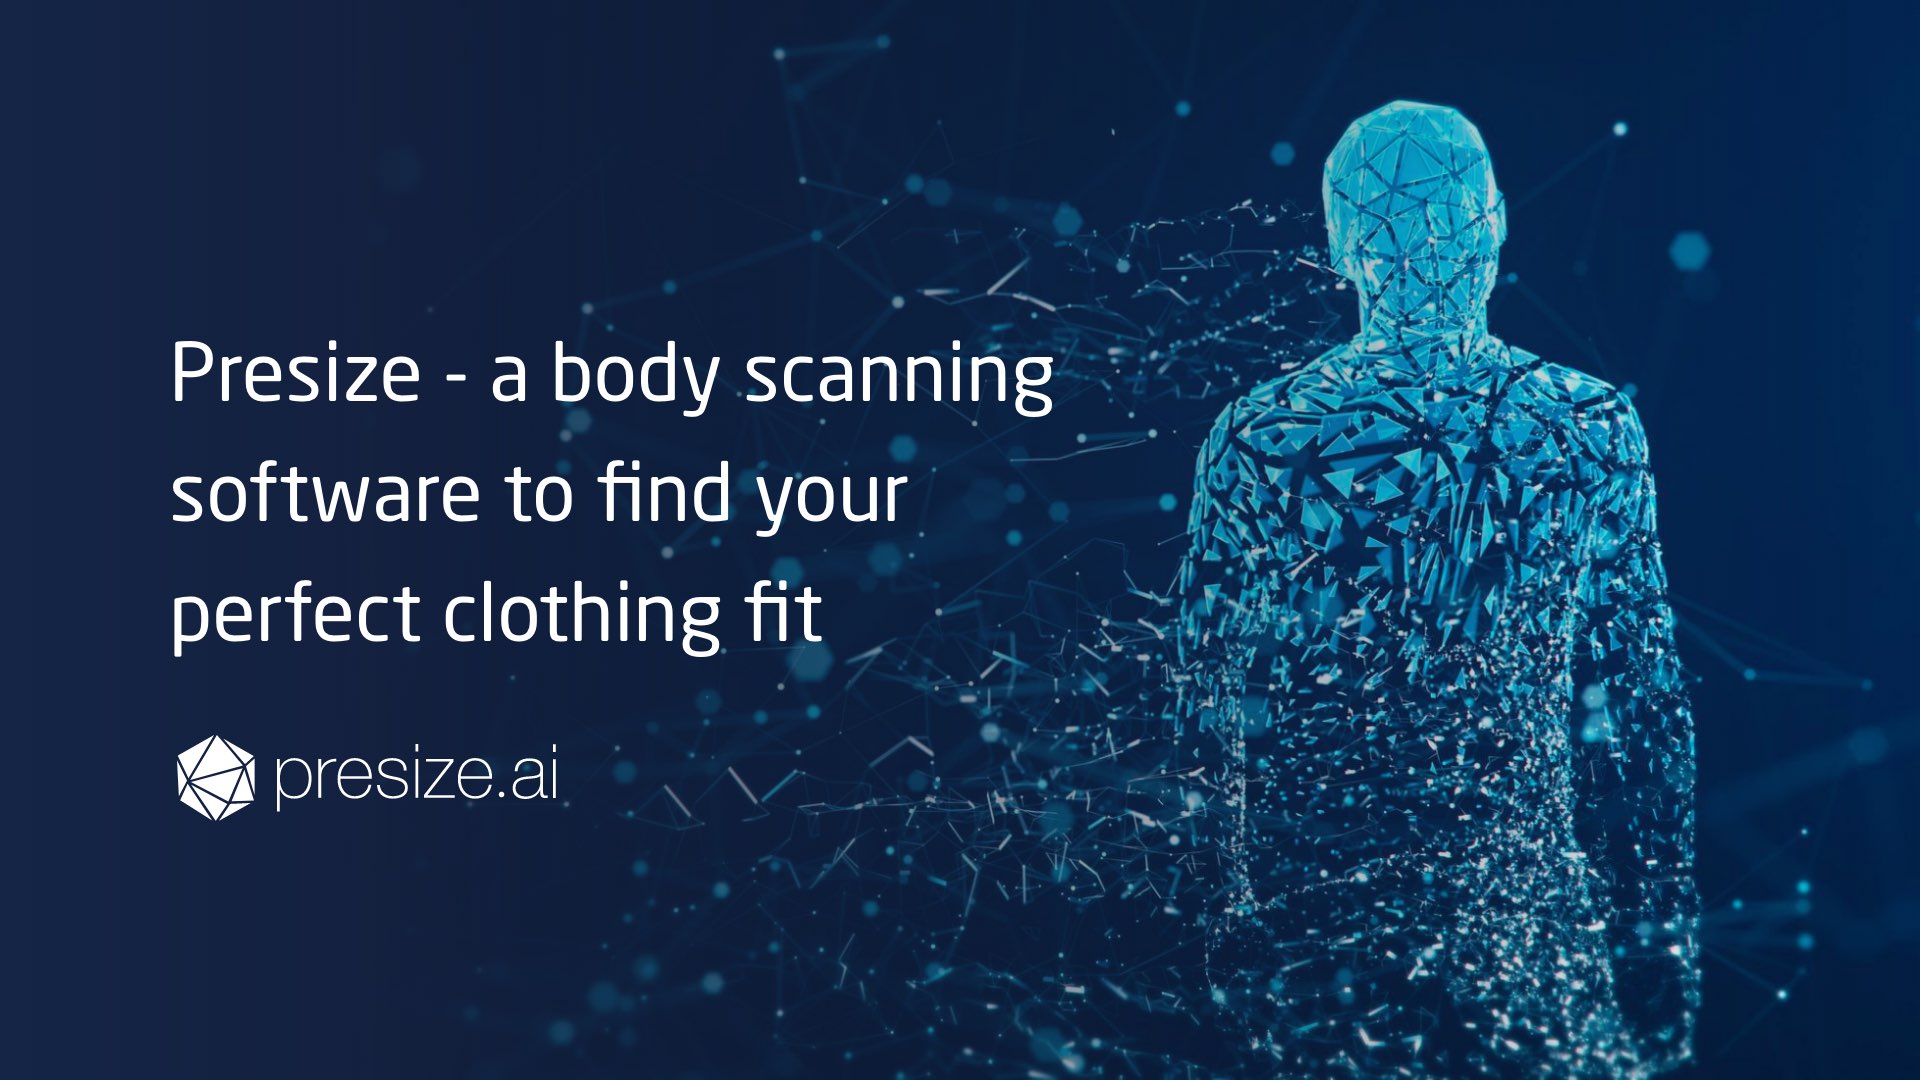 Presize - a body scanning software to find your perfect clothing fit